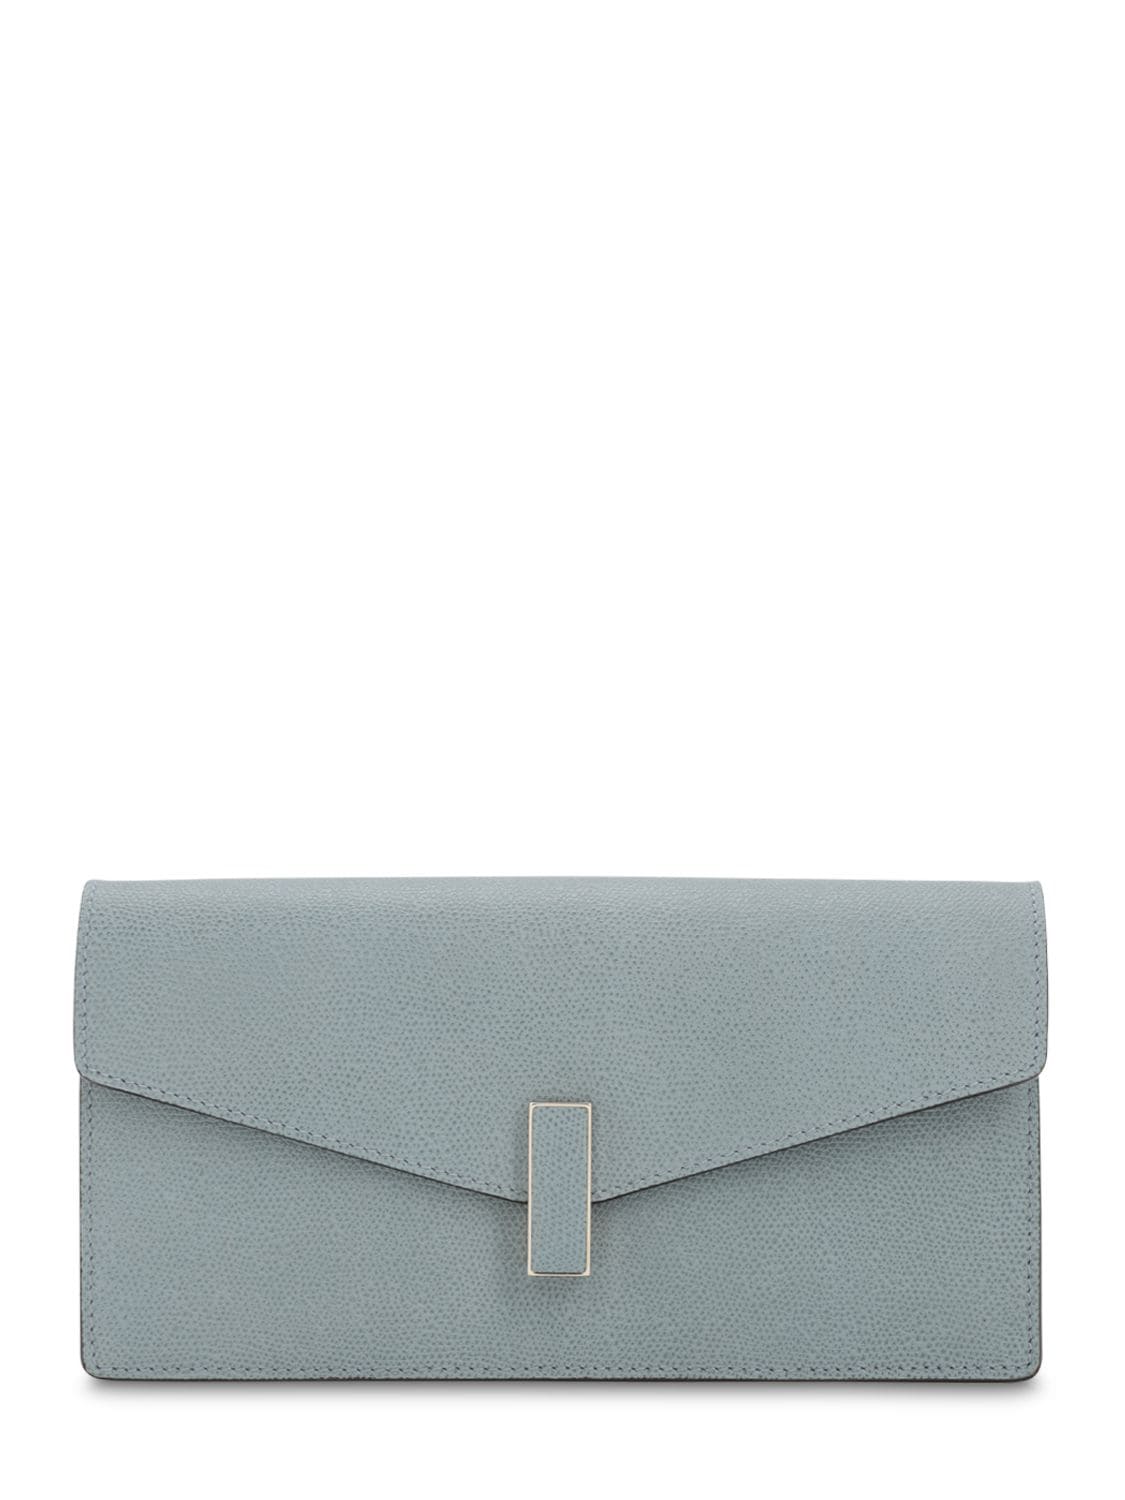 Valextra Iside Grained Leather Clutch In Polvere